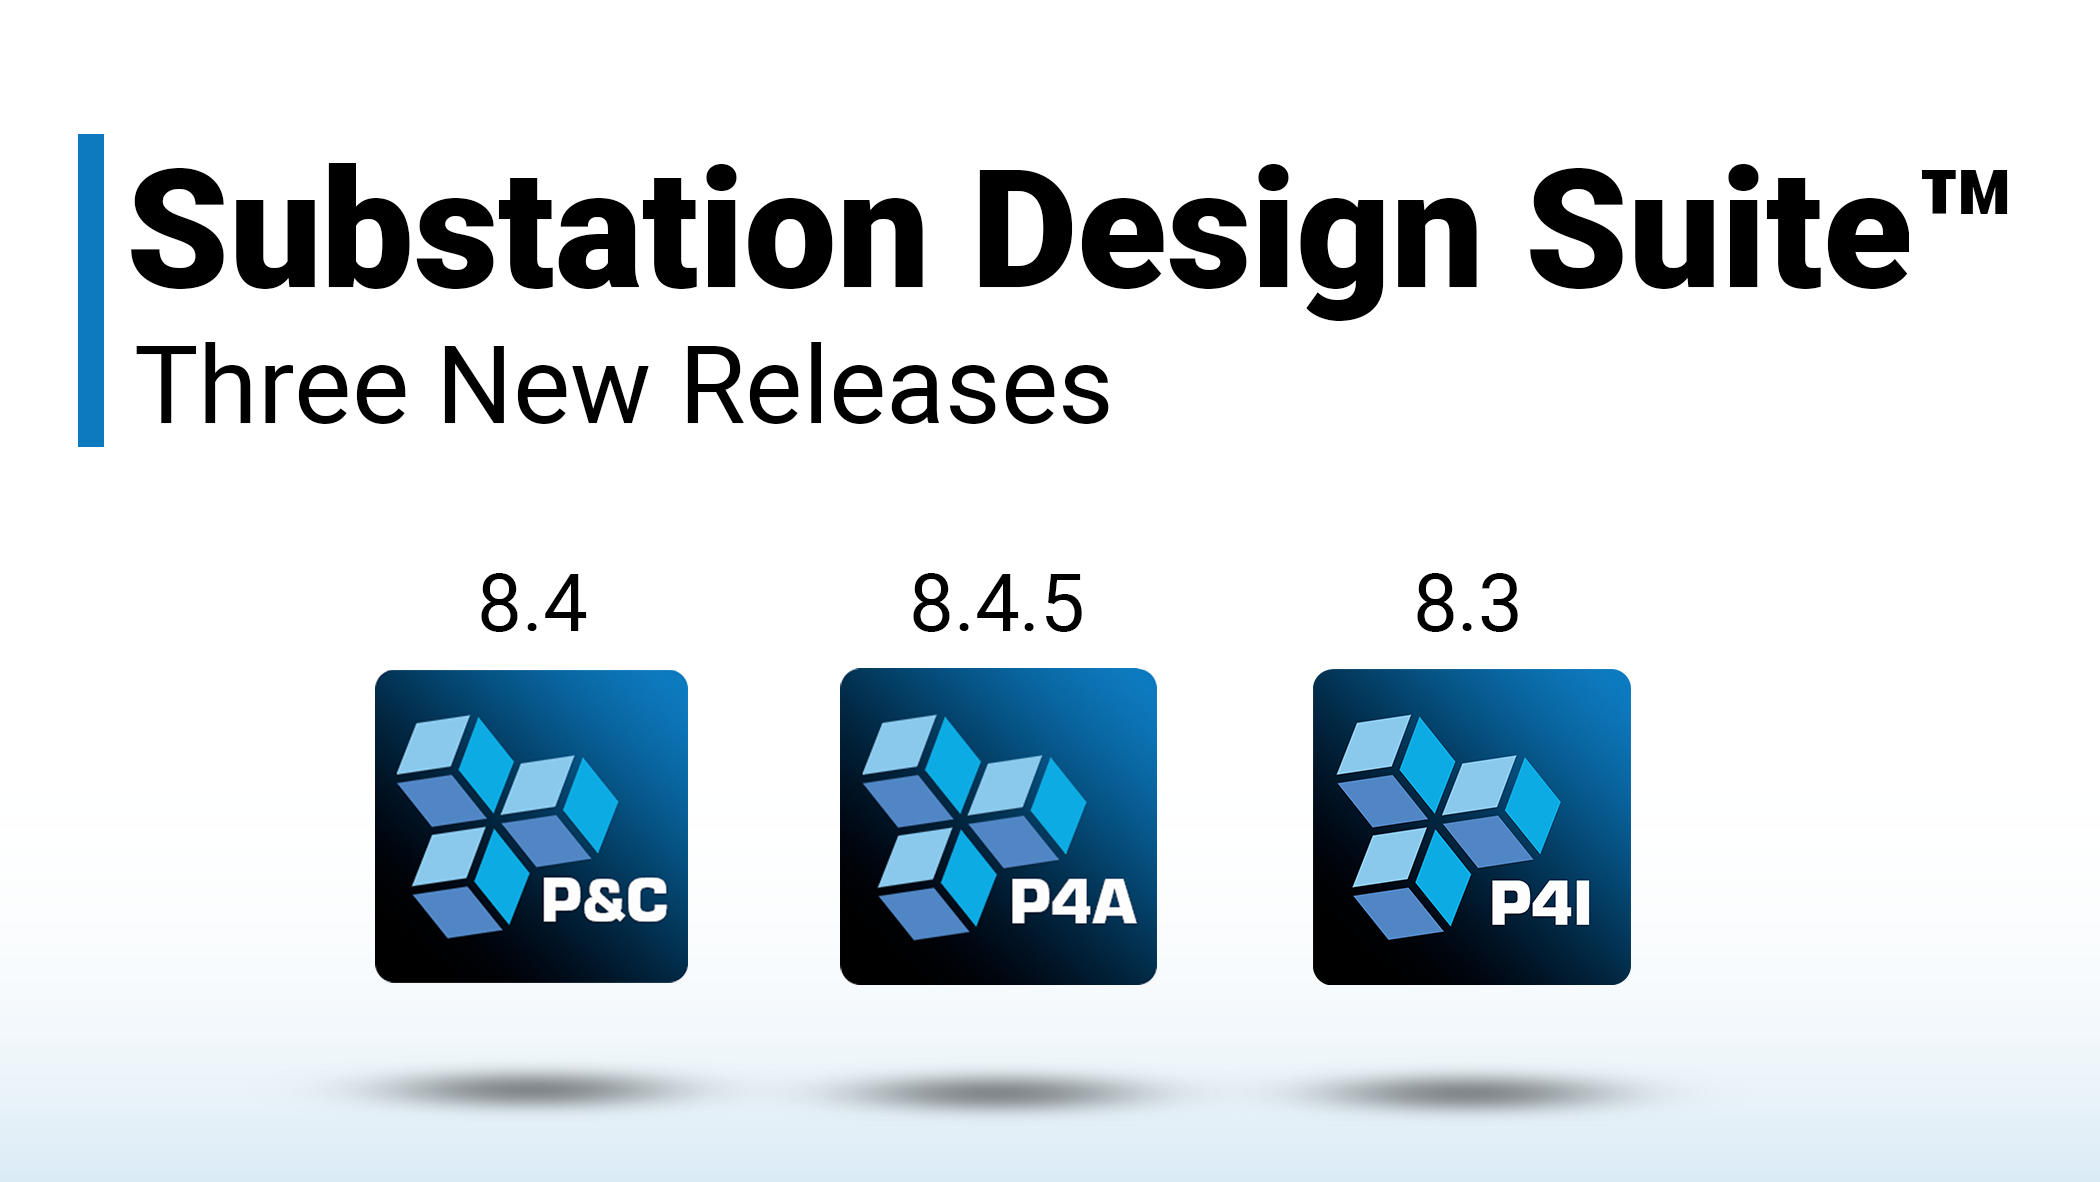 Release Image of the three Substation Design Suite products.